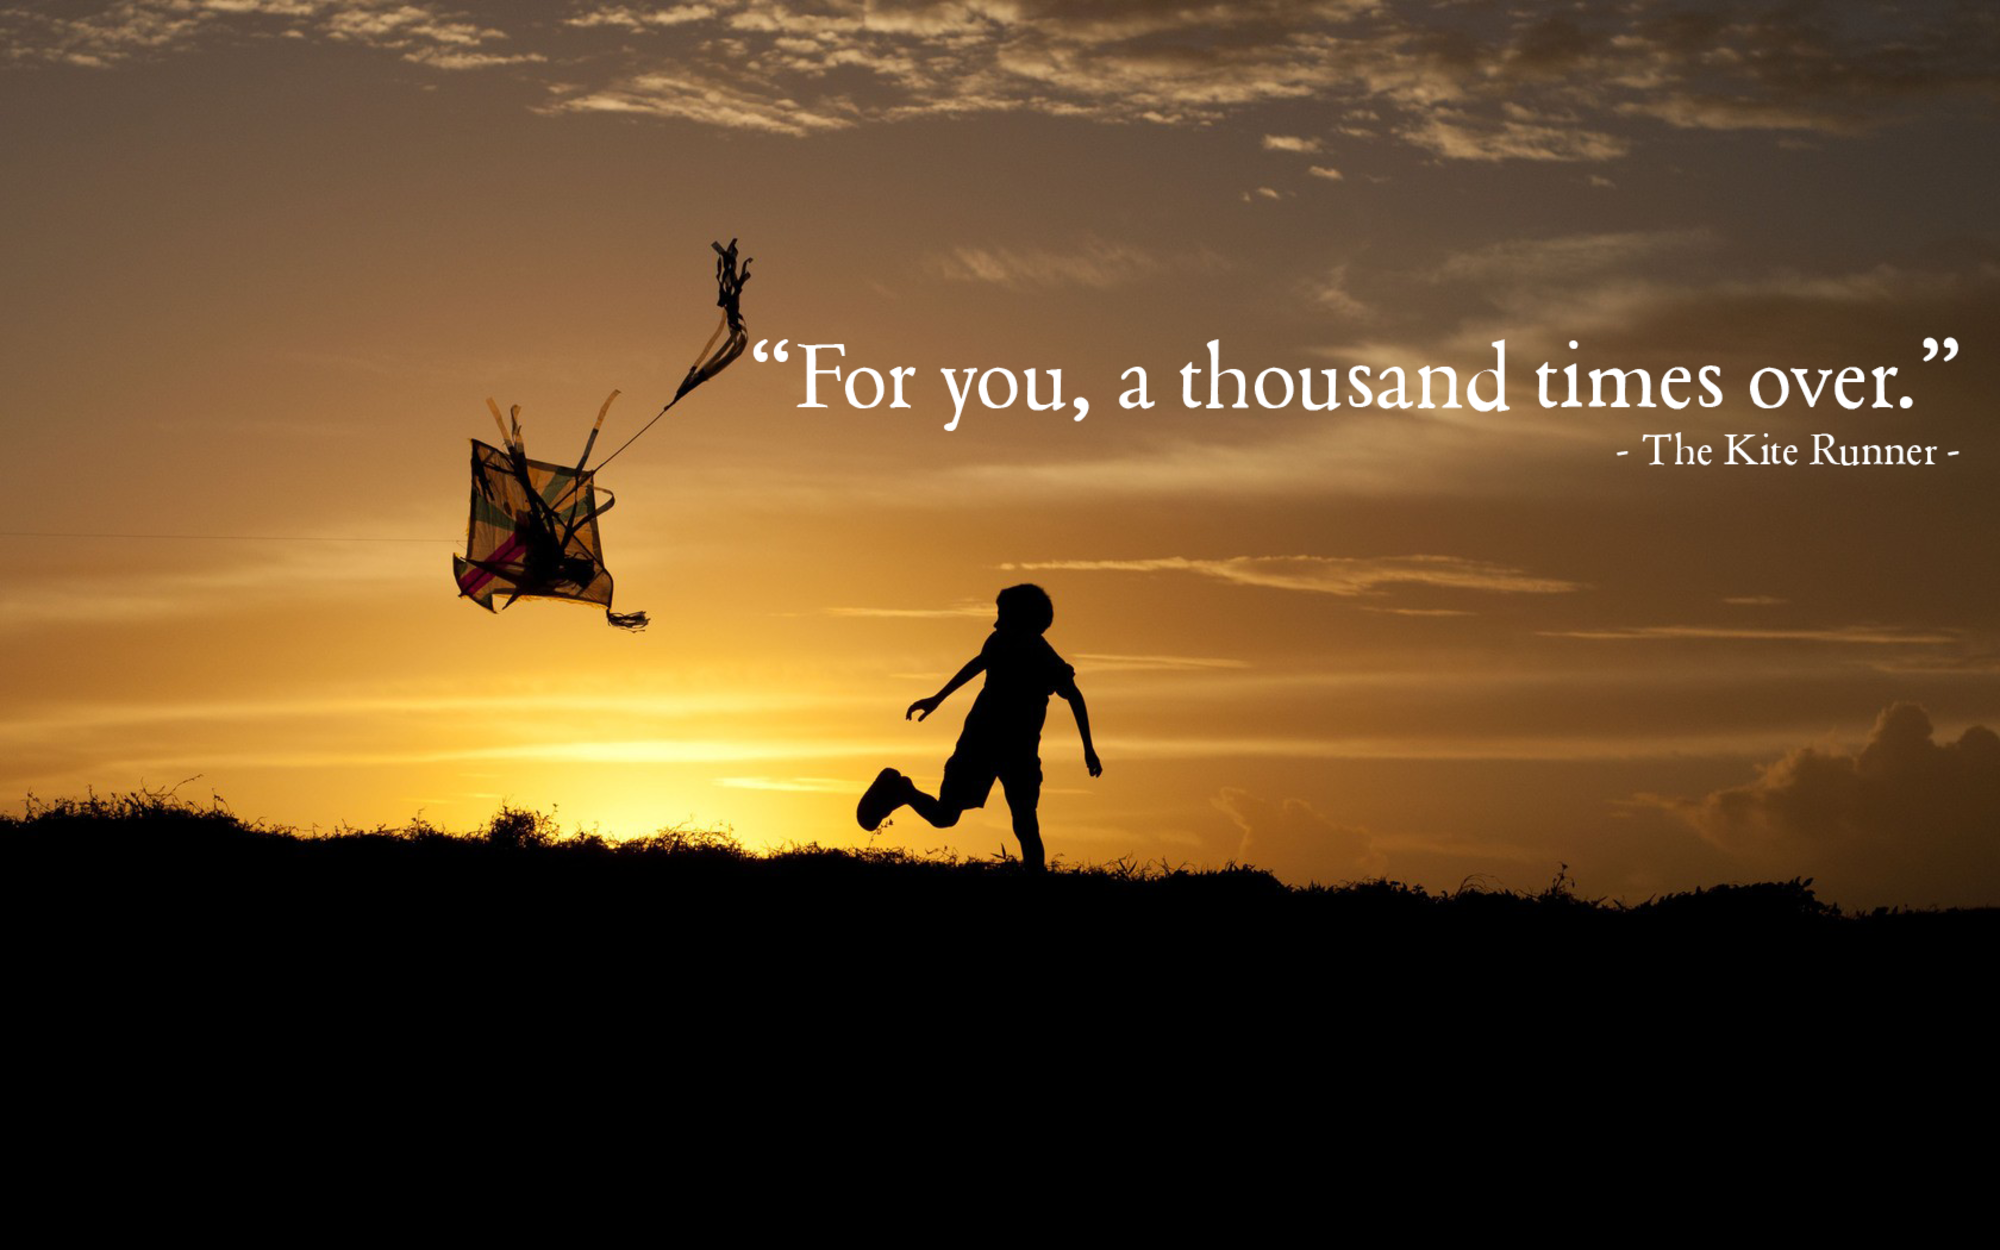 For you, a thousand times over. The kite runner quotes, Runner quotes, The kite runner